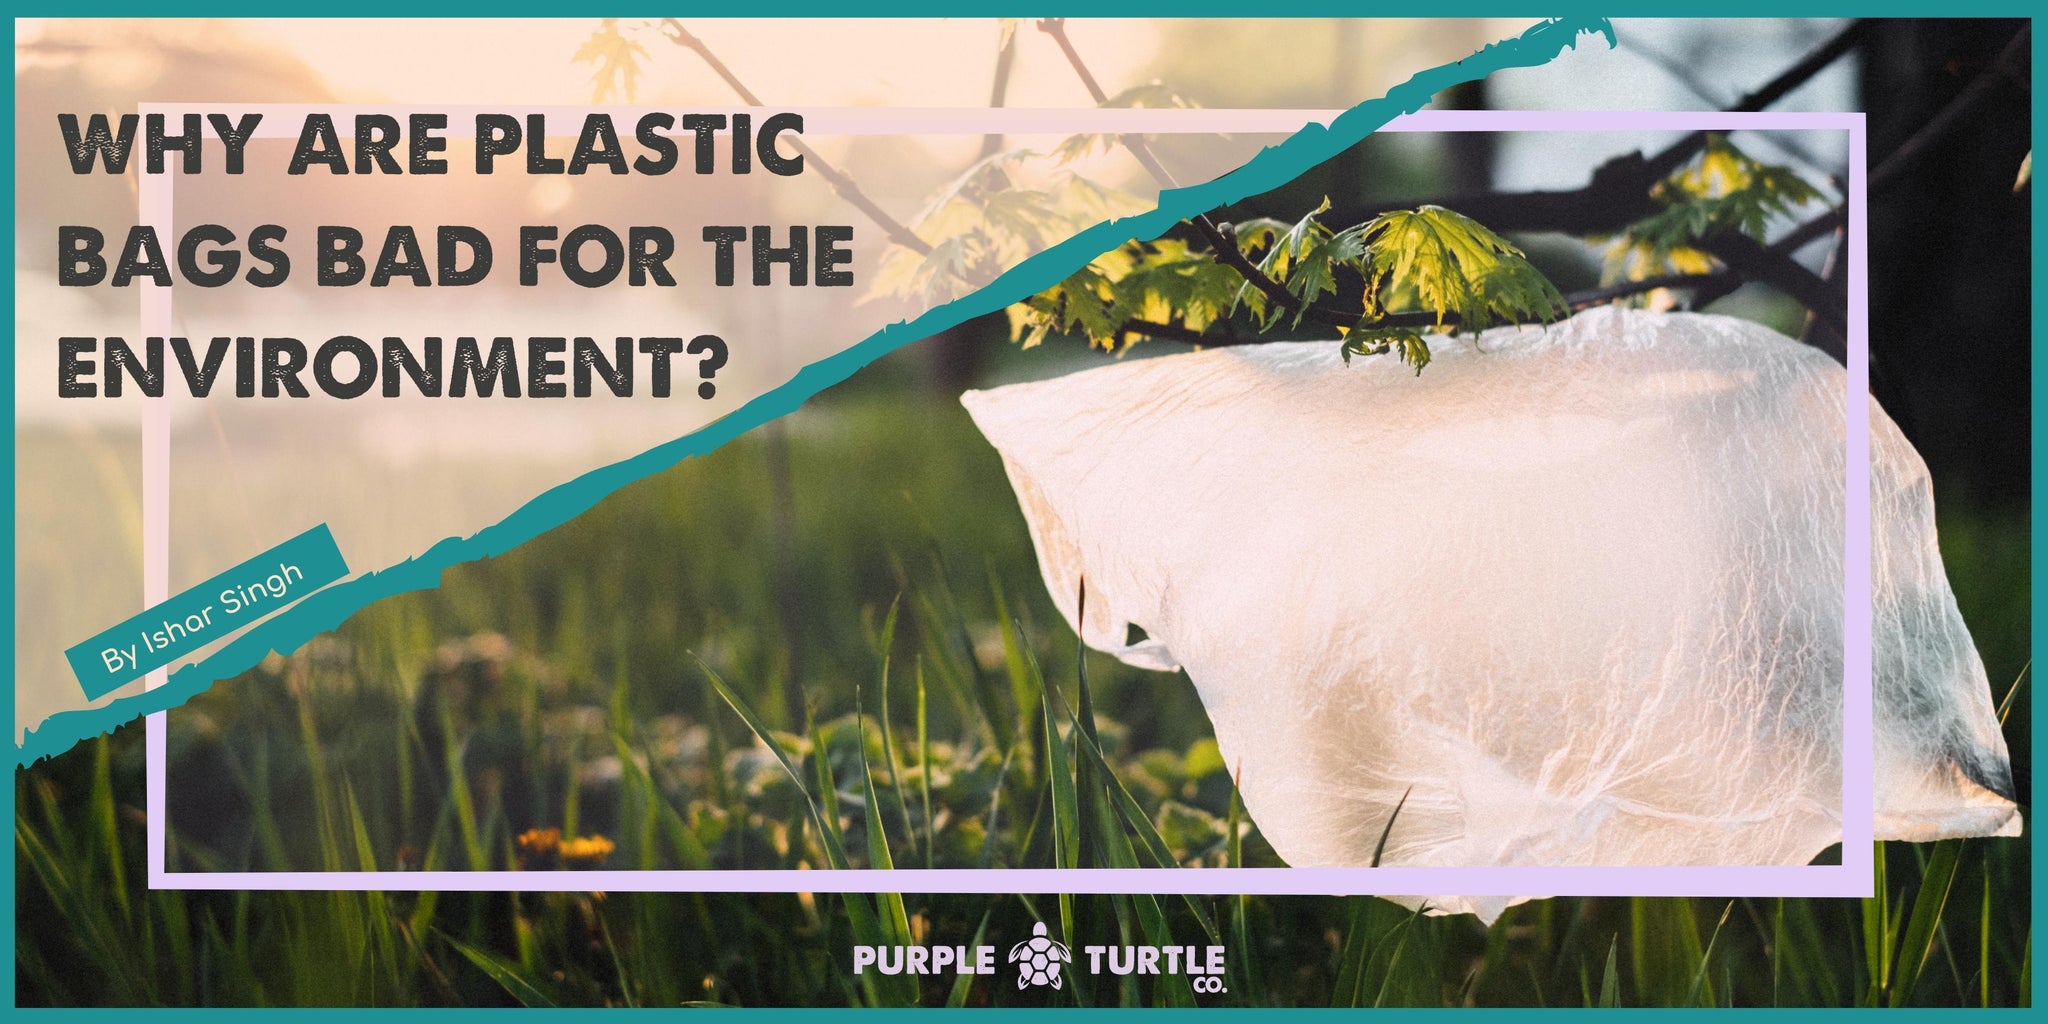 Why are plastic bags bad for the environment?